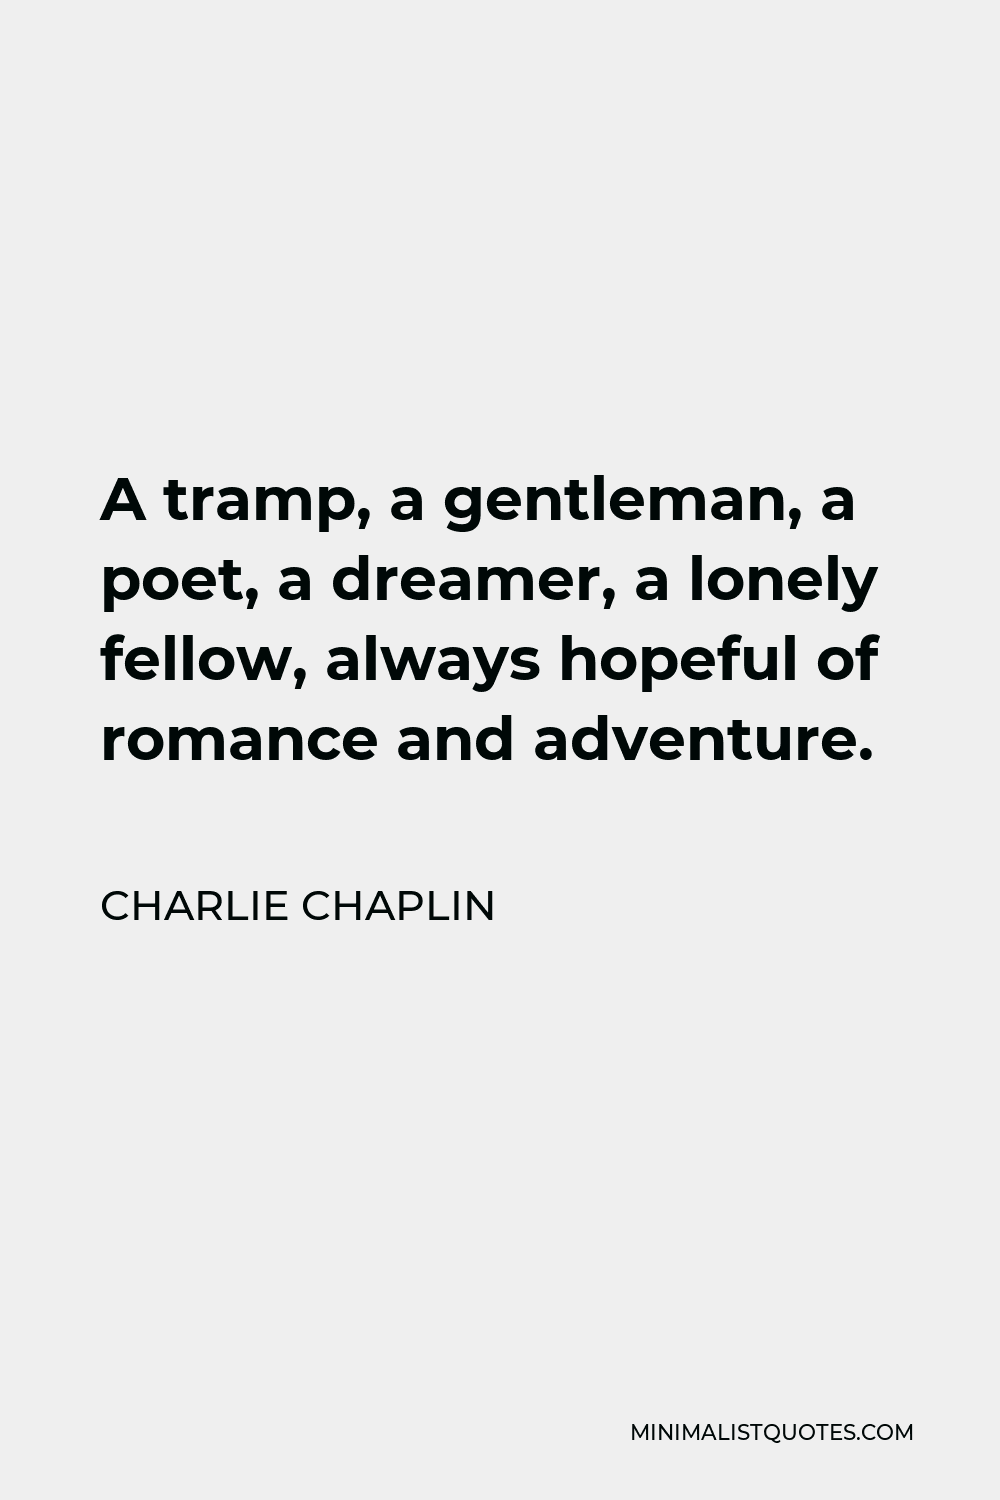 Charlie Chaplin Quote - A tramp, a gentleman, a poet, a dreamer, a lonely fellow, always hopeful of romance and adventure.